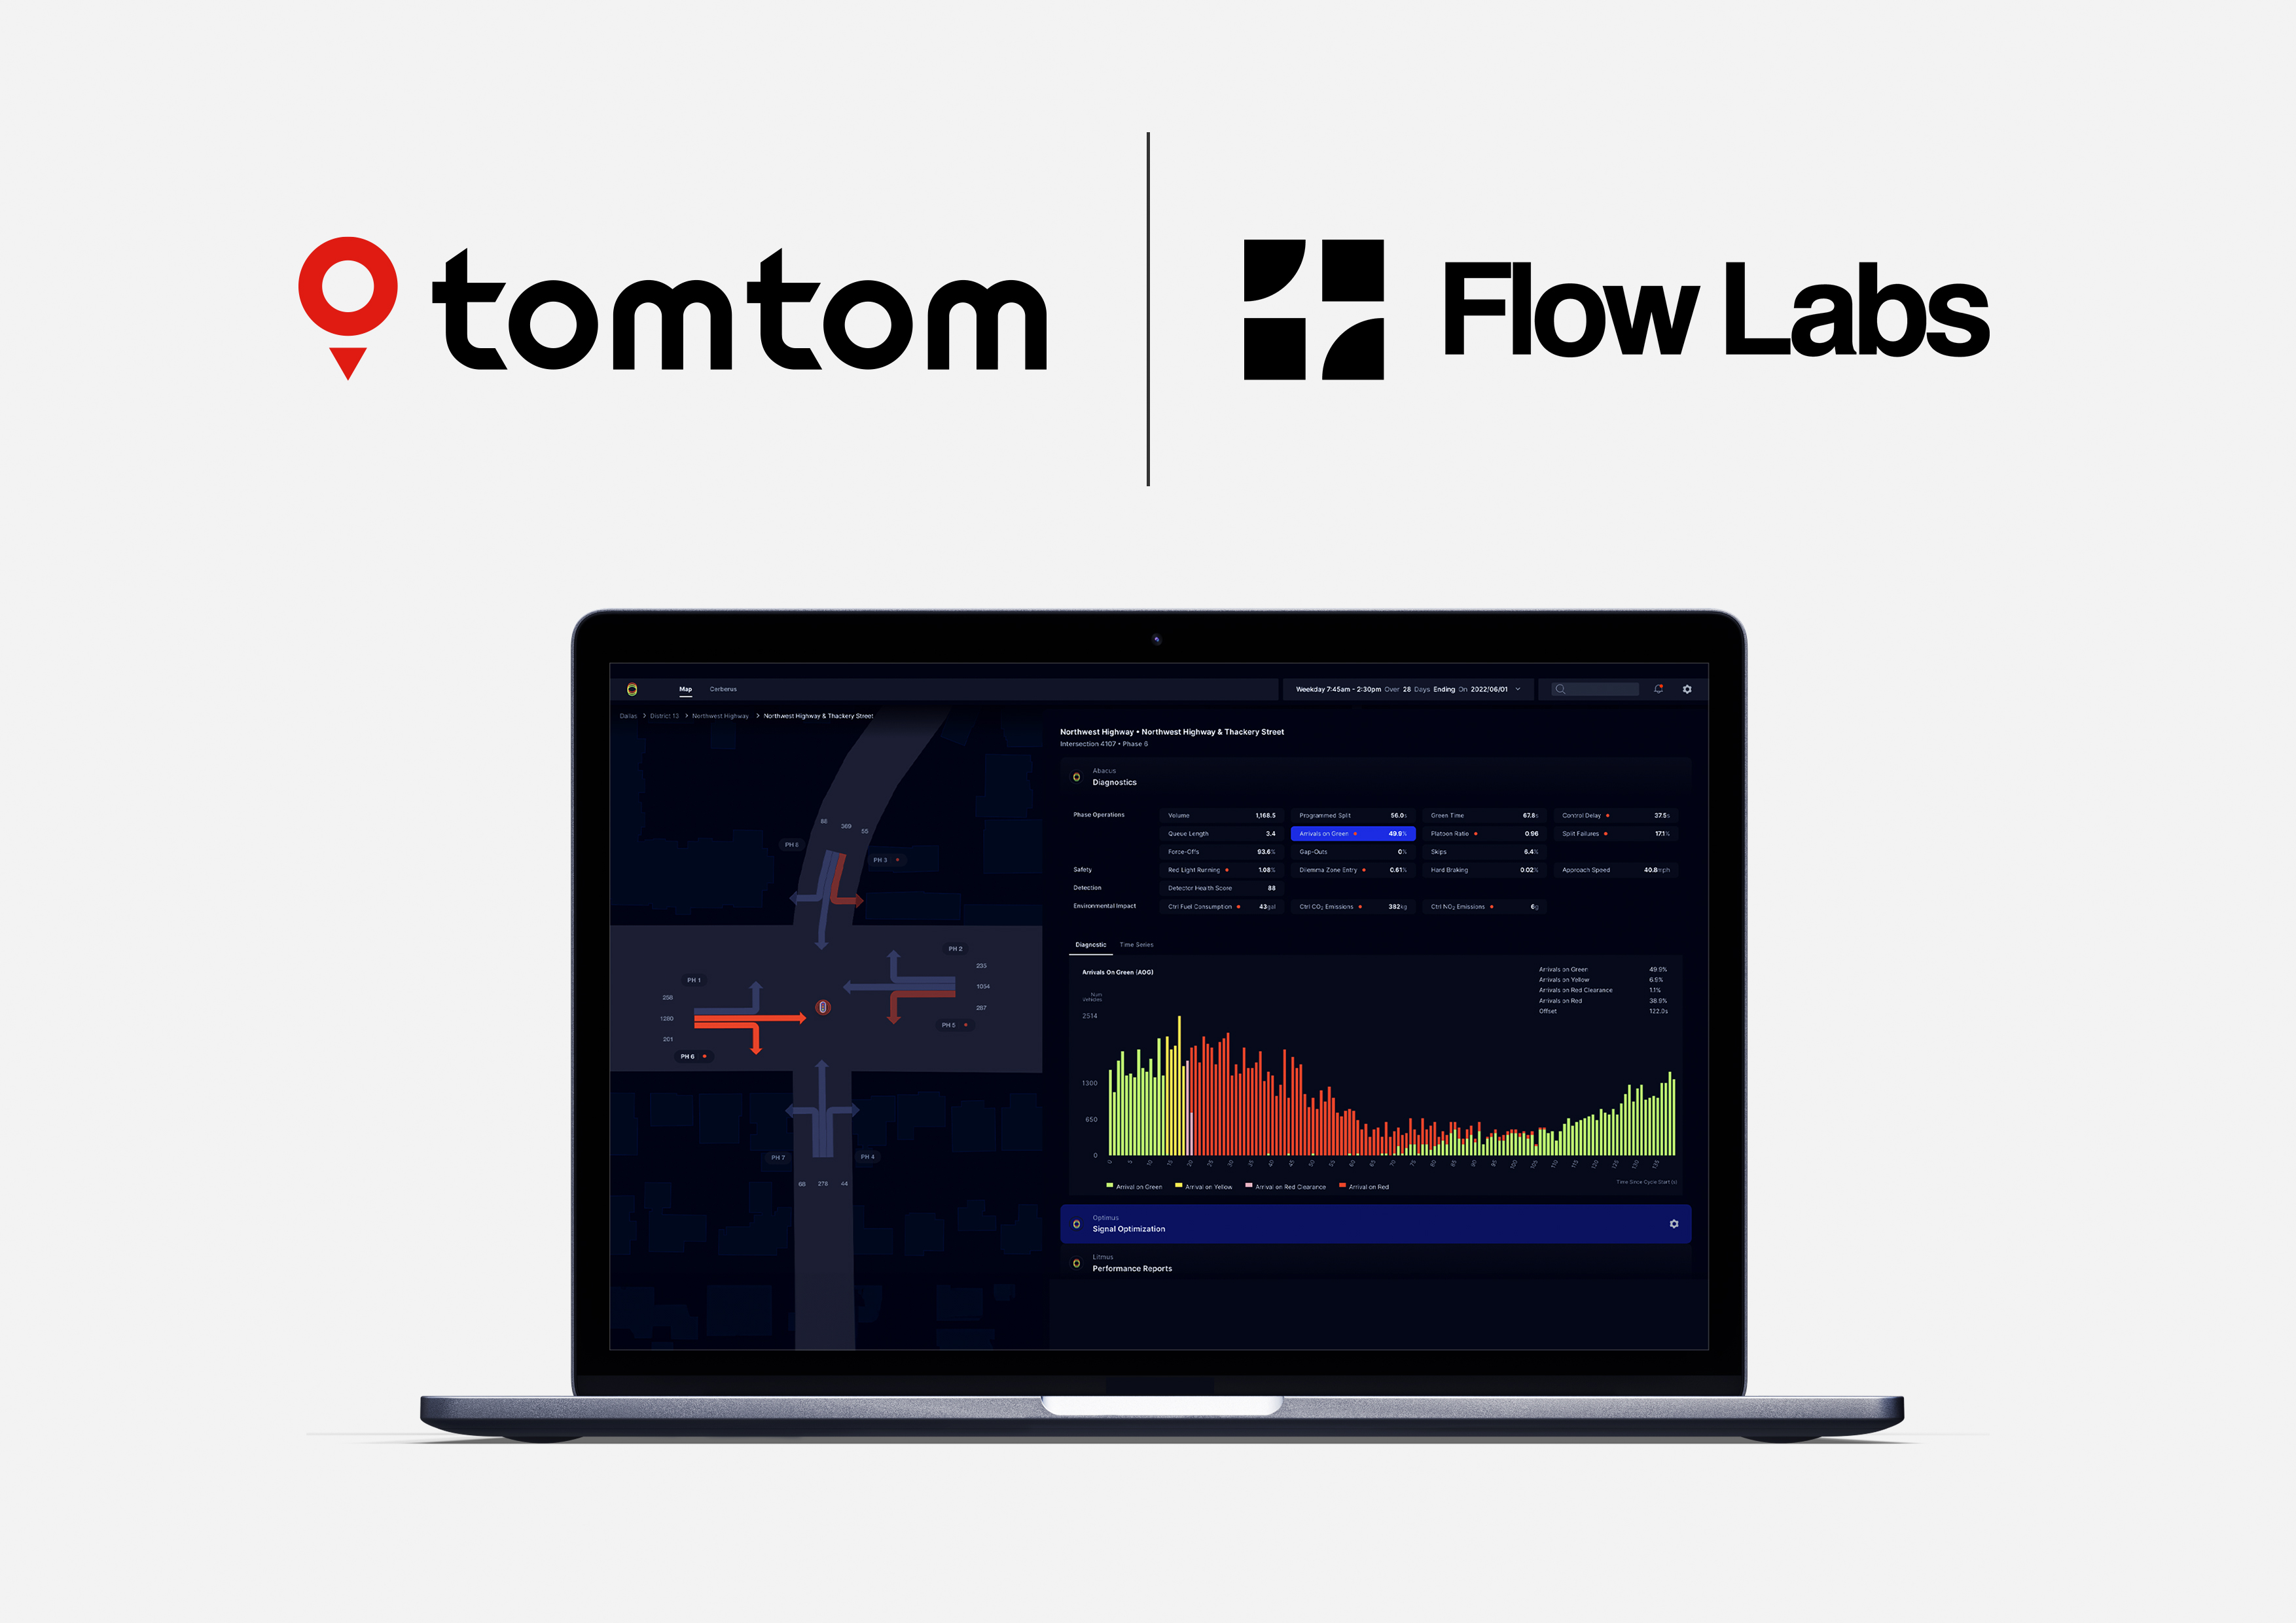 TomTom and Flow Labs partner to deliver advanced, real-time road network optimization and insights